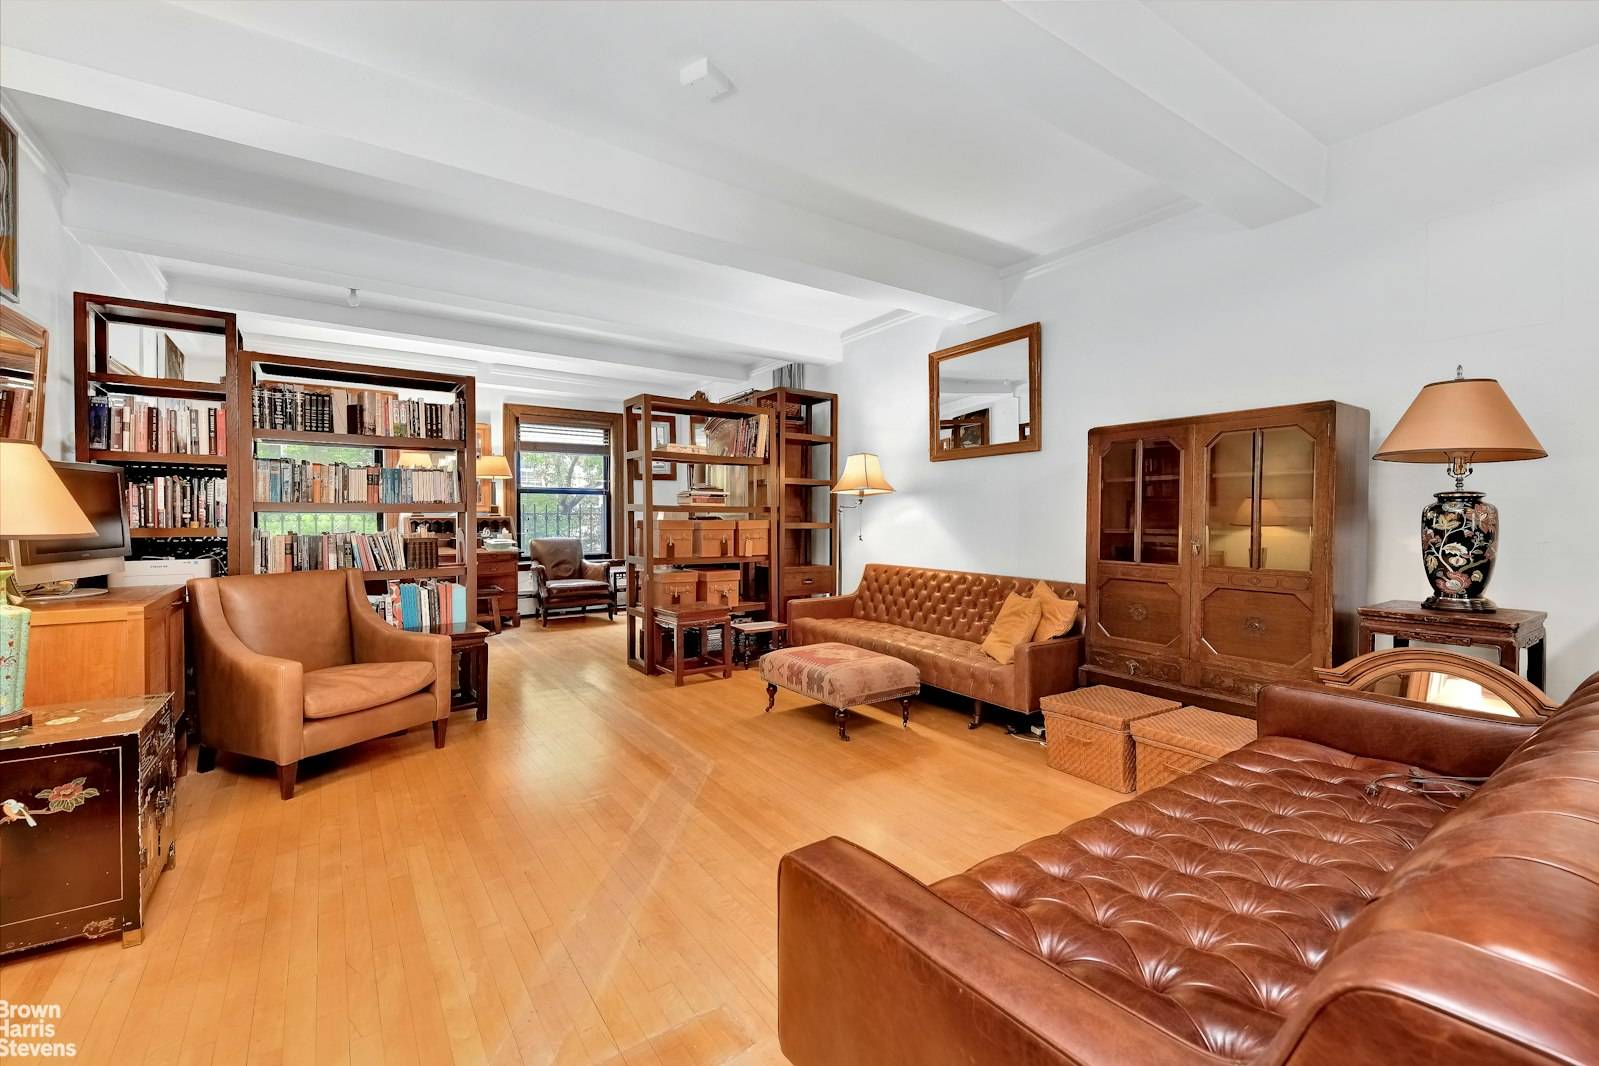 This rarely available classic condo loft is a true gem, located in the quiet northern end of the East Village in a discreet five story building.